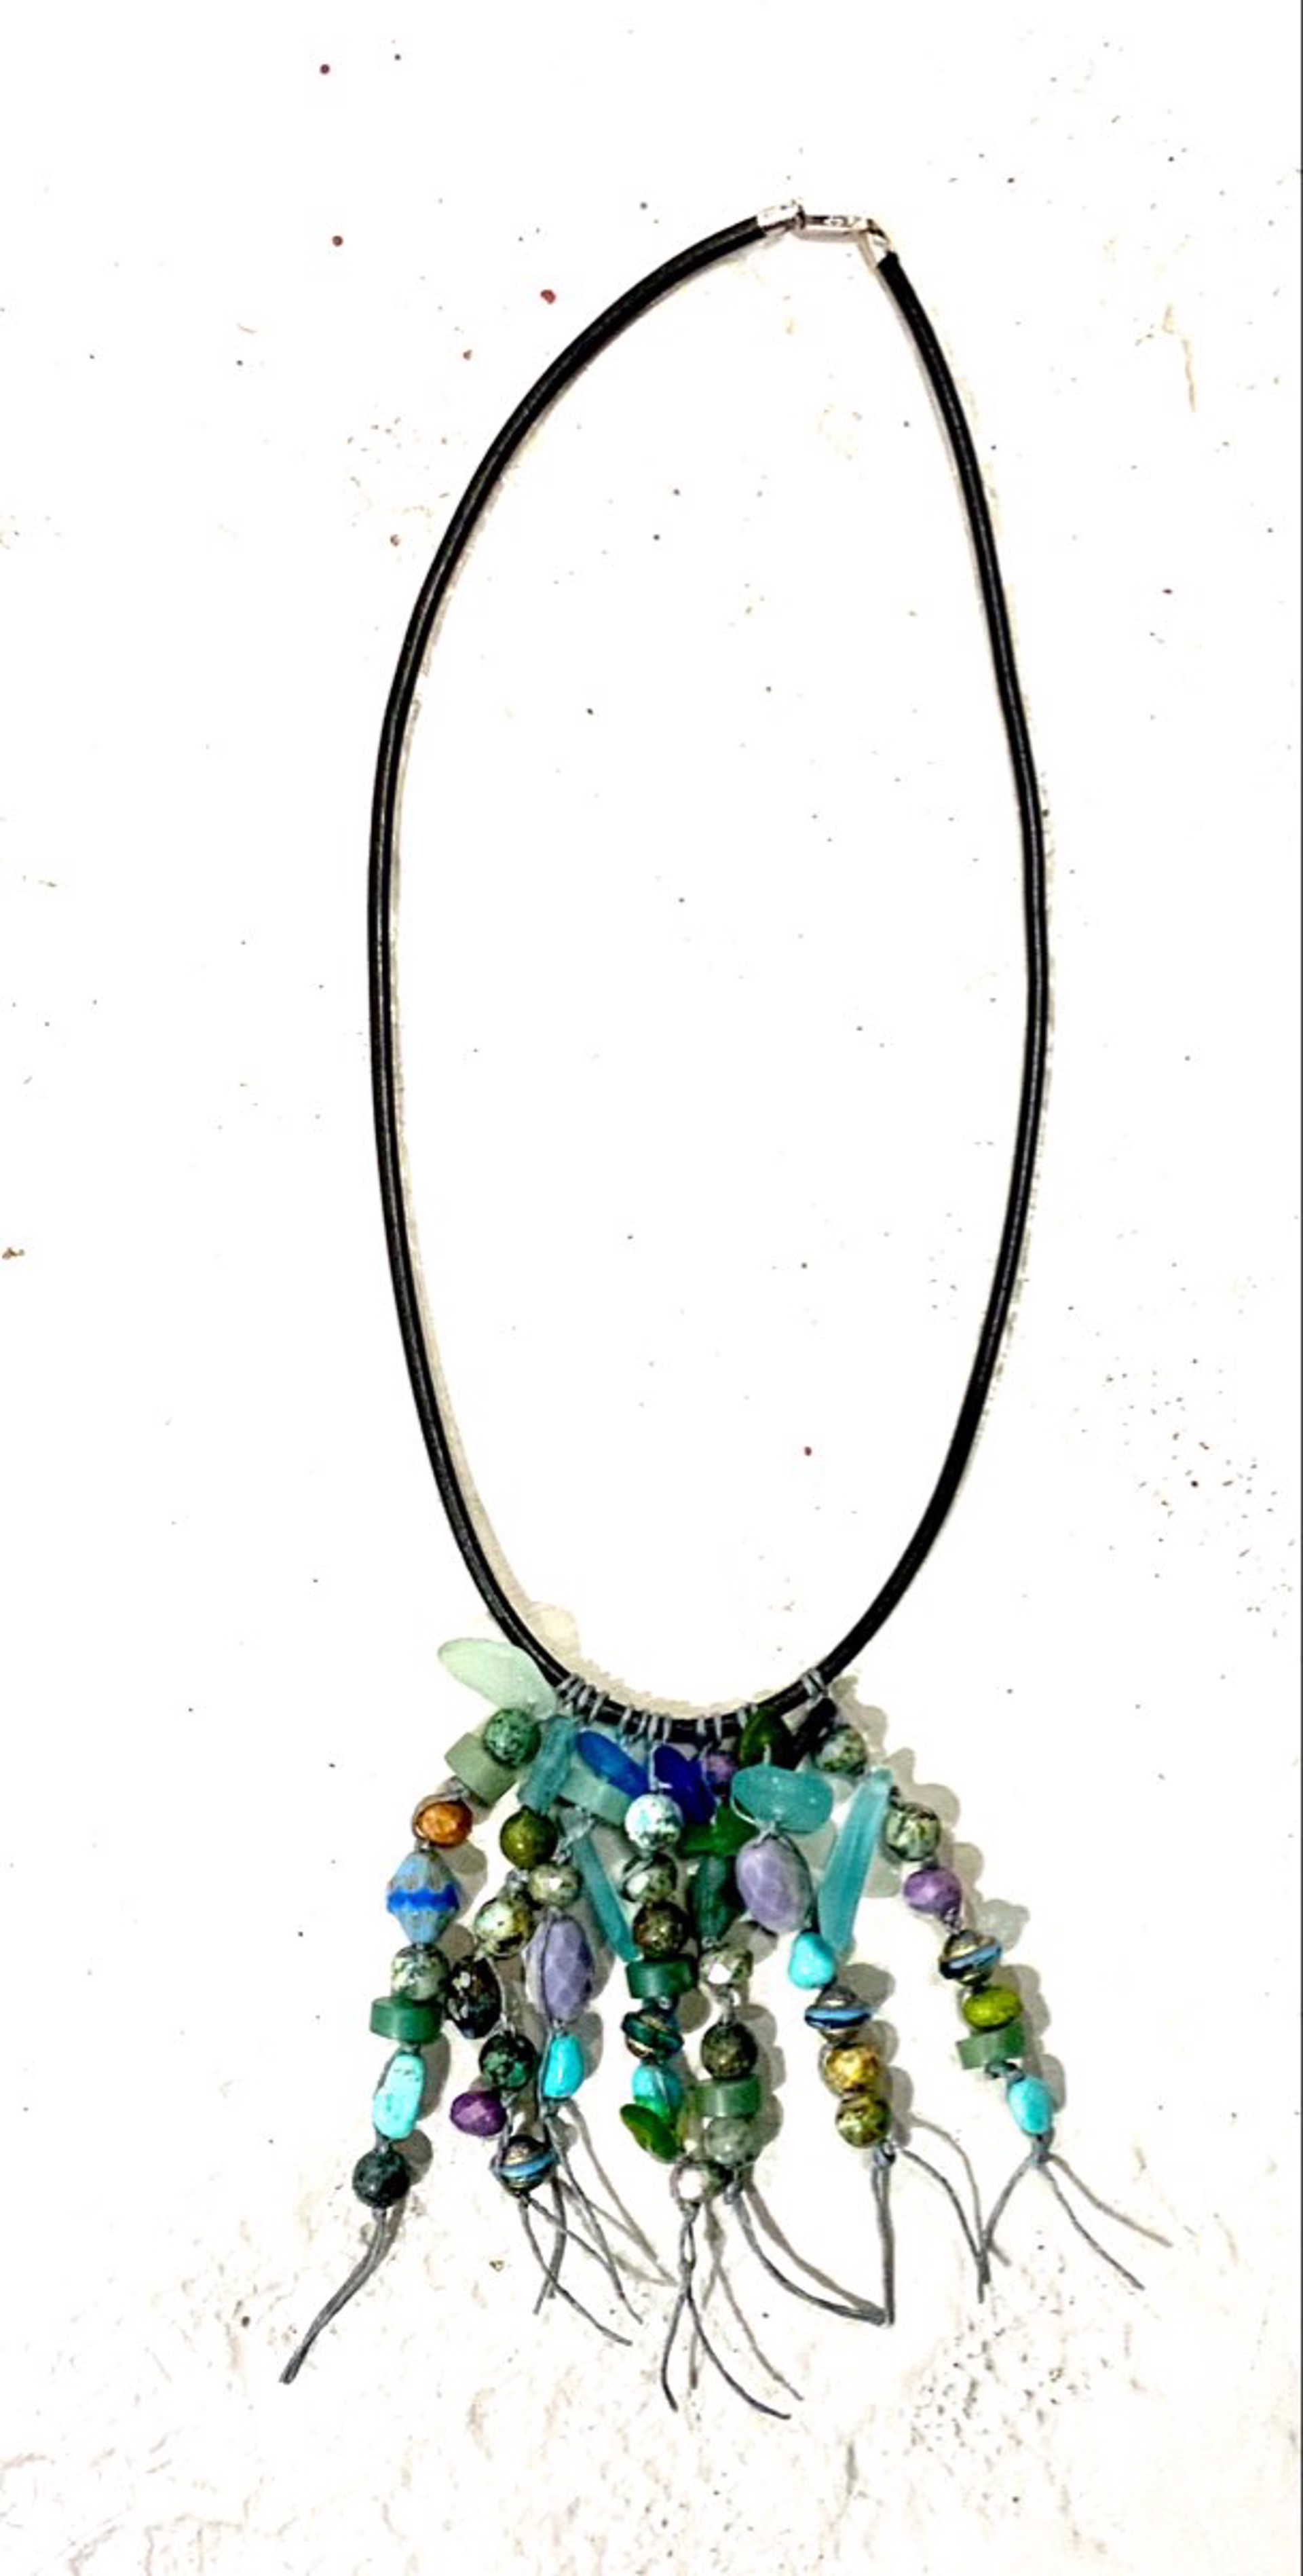 Beach Glass Necklace by Rosemary McLeod